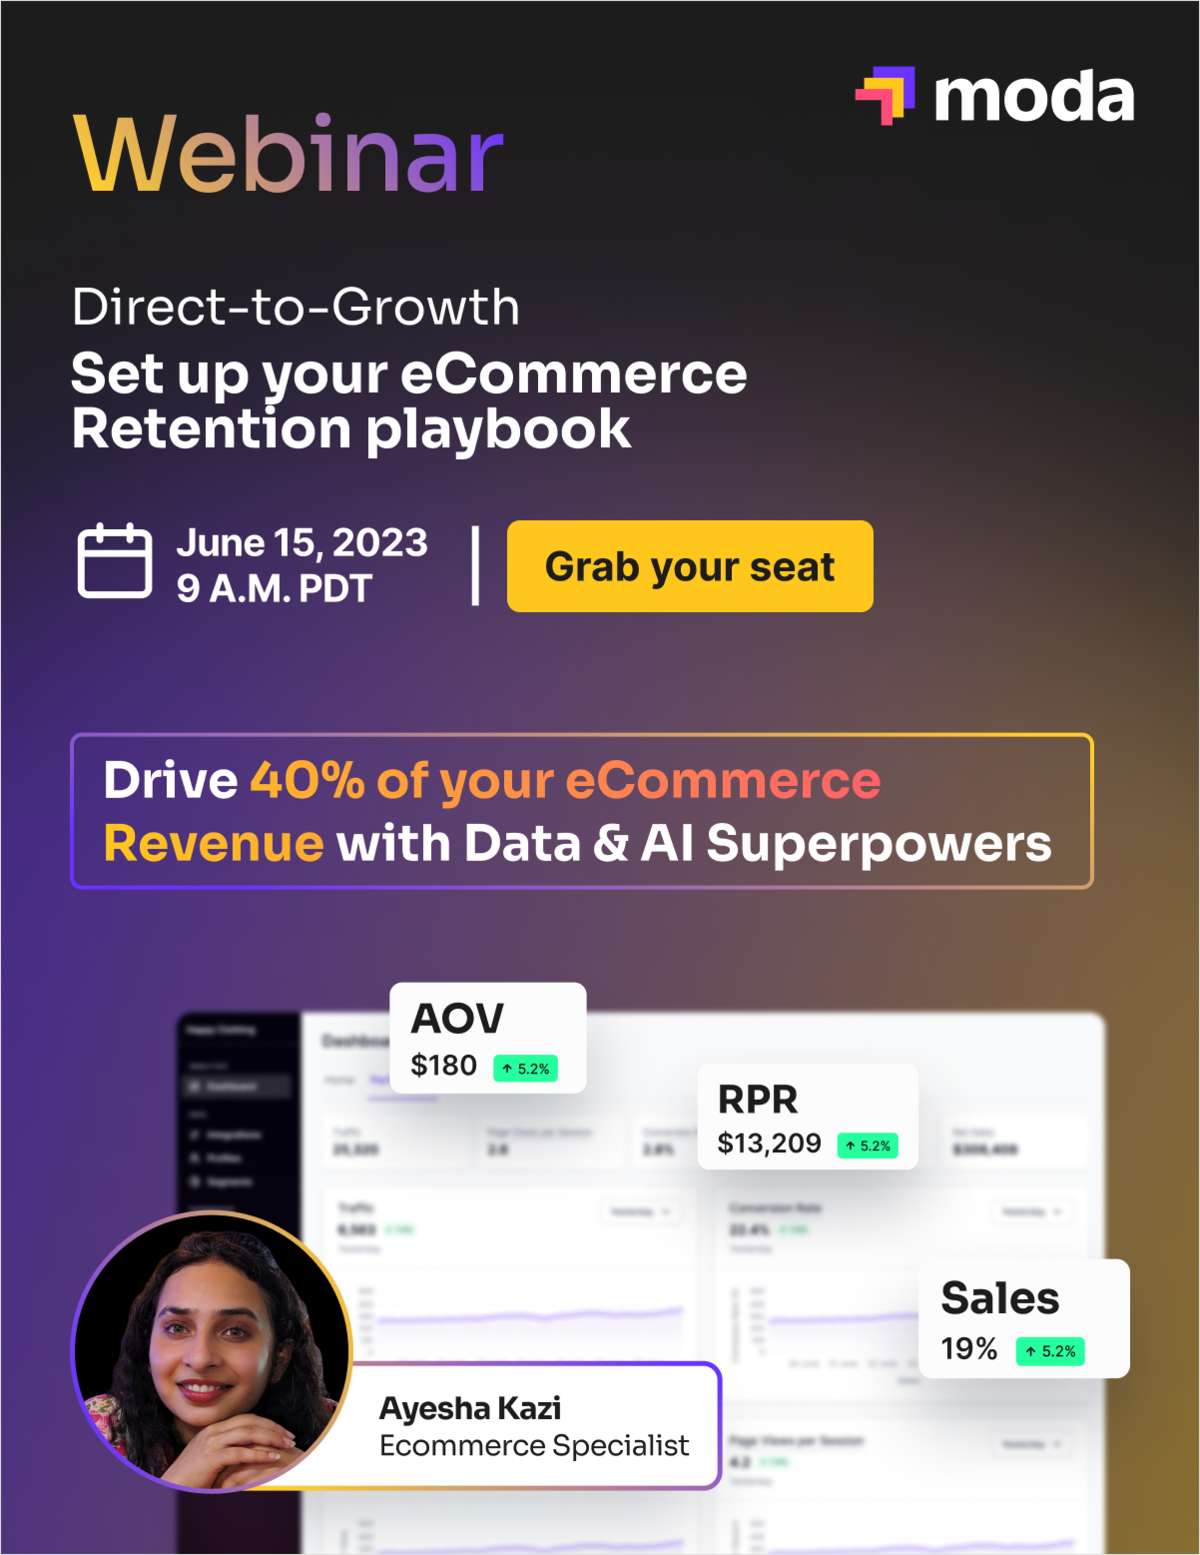 Drive 40% of your eCommerce Revenue with Data & AI Superpowers